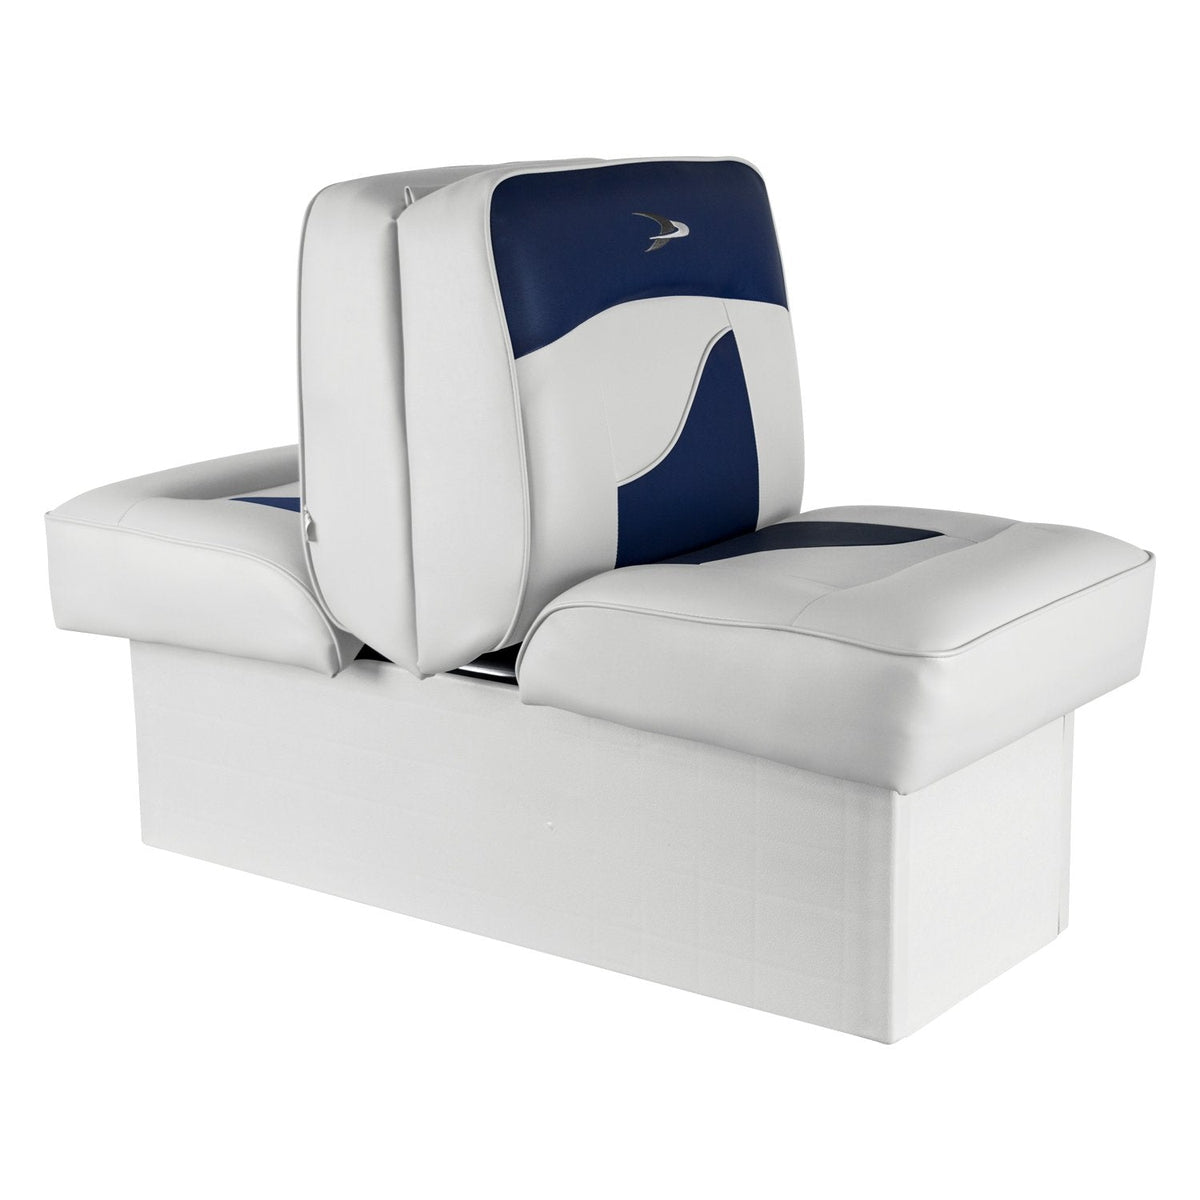 Wise Oversized - Not Qualified for Free Shipping Wise Back-to-Back Lounge Seat White/Blue #8WD1033-0031